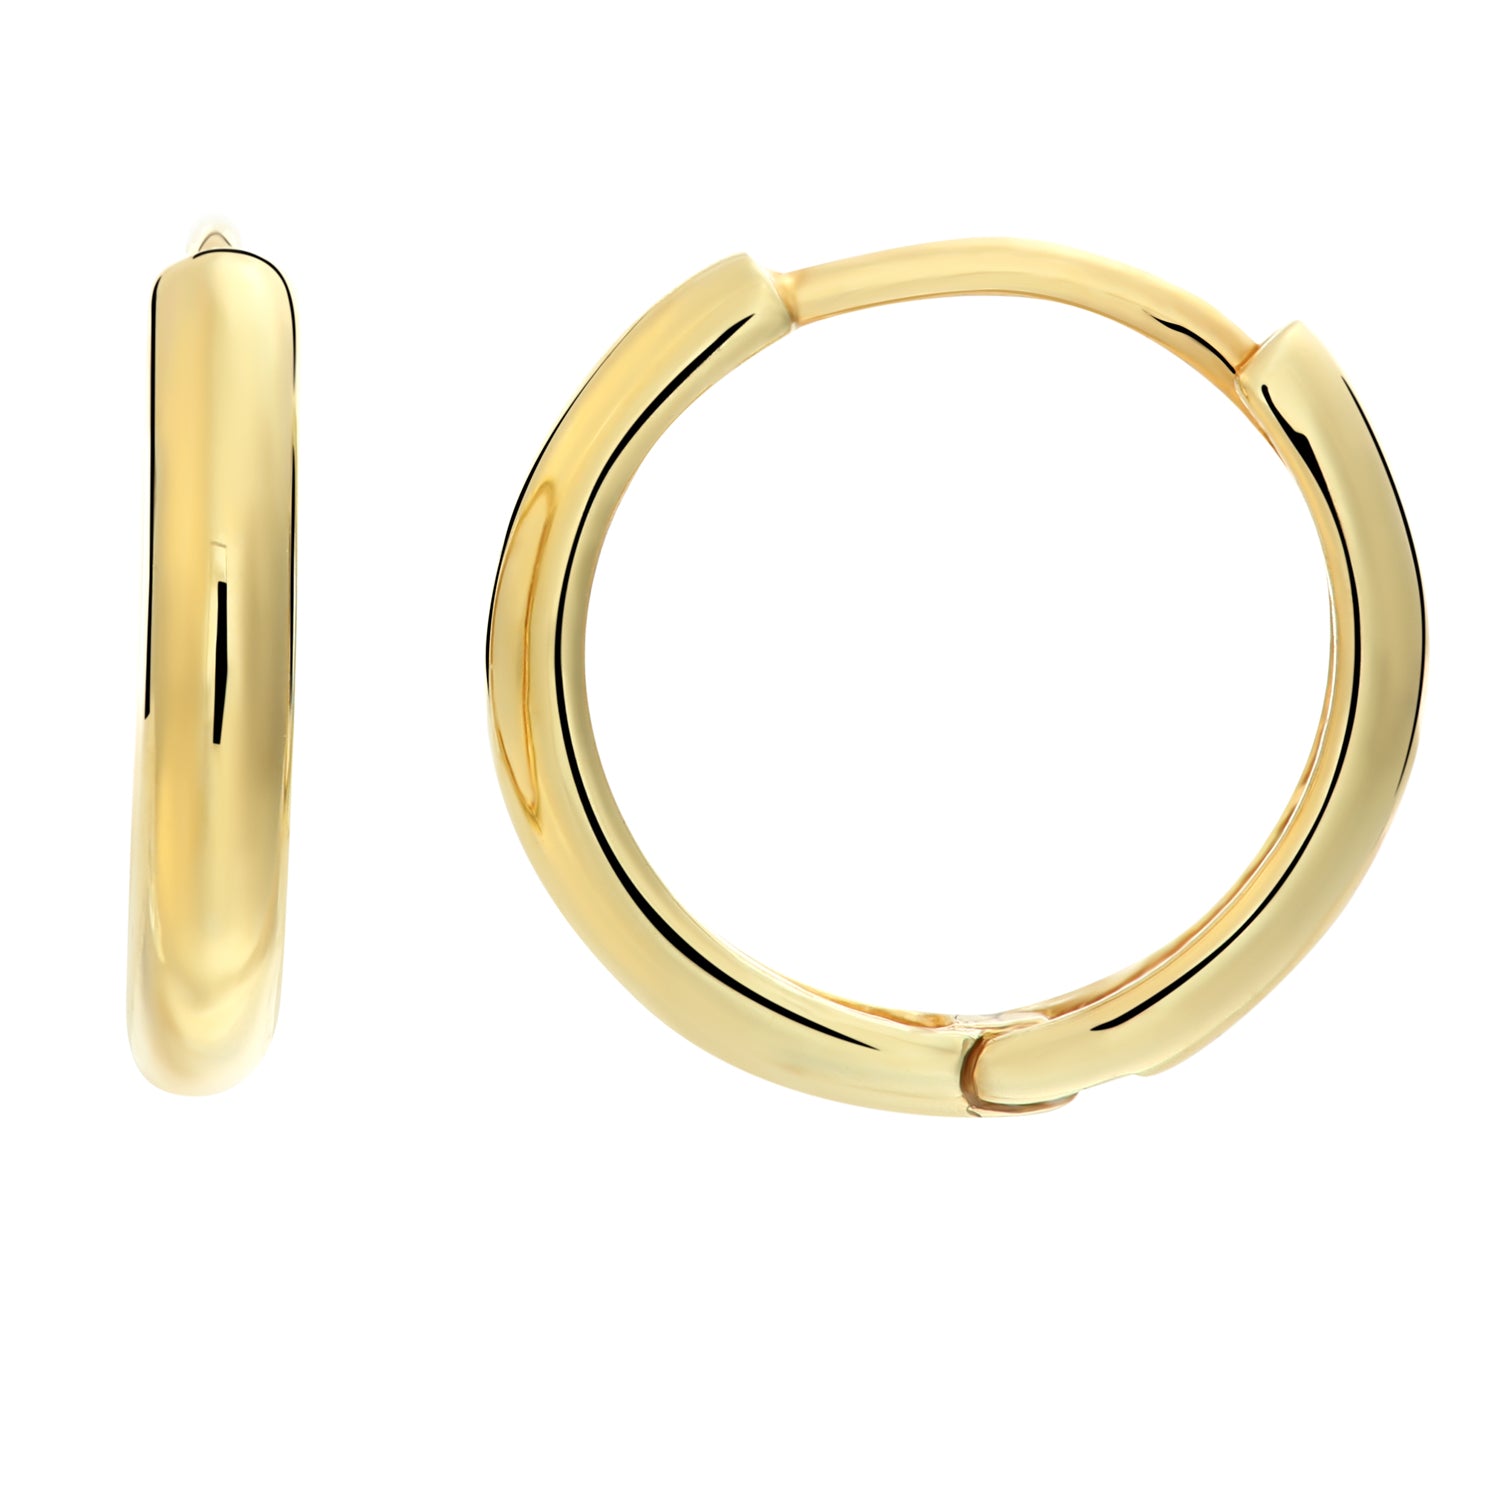 Brilliant Sterling Silver Polished Classic Huggie Hoop Earrings Gold